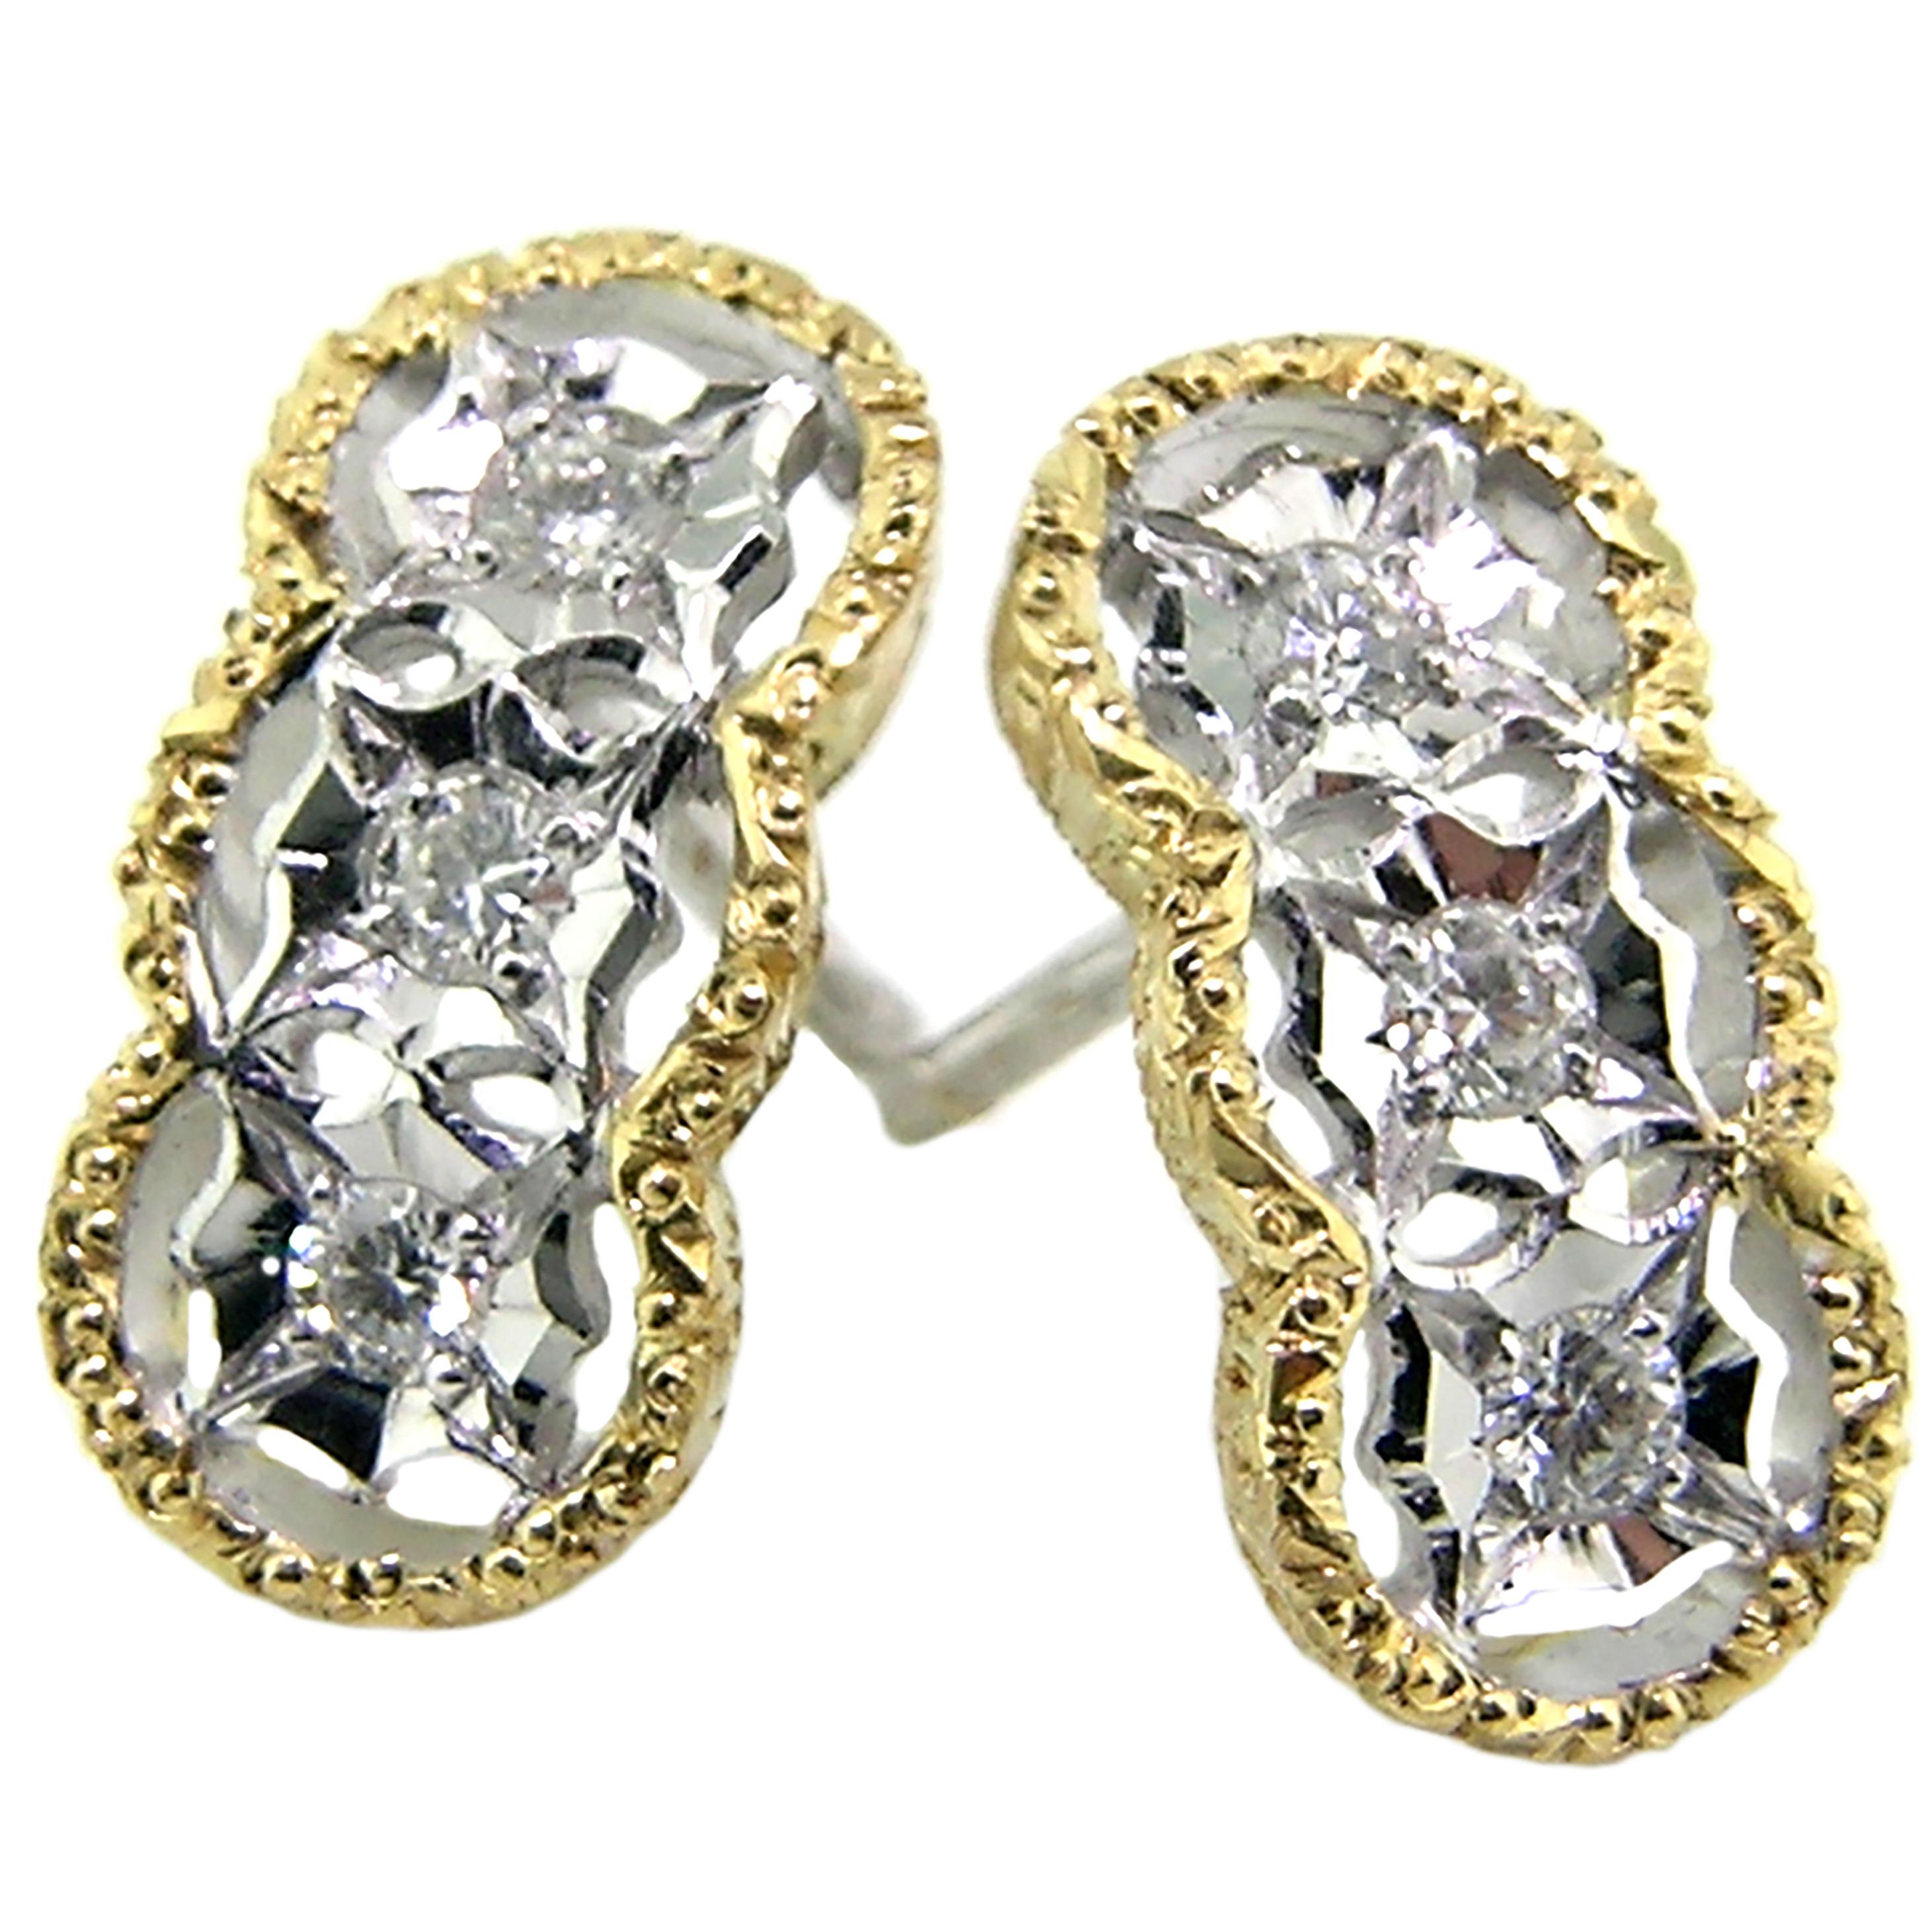 Diamond and 18kt Hand-Engraved Stud Earrings, Handmade in Italy